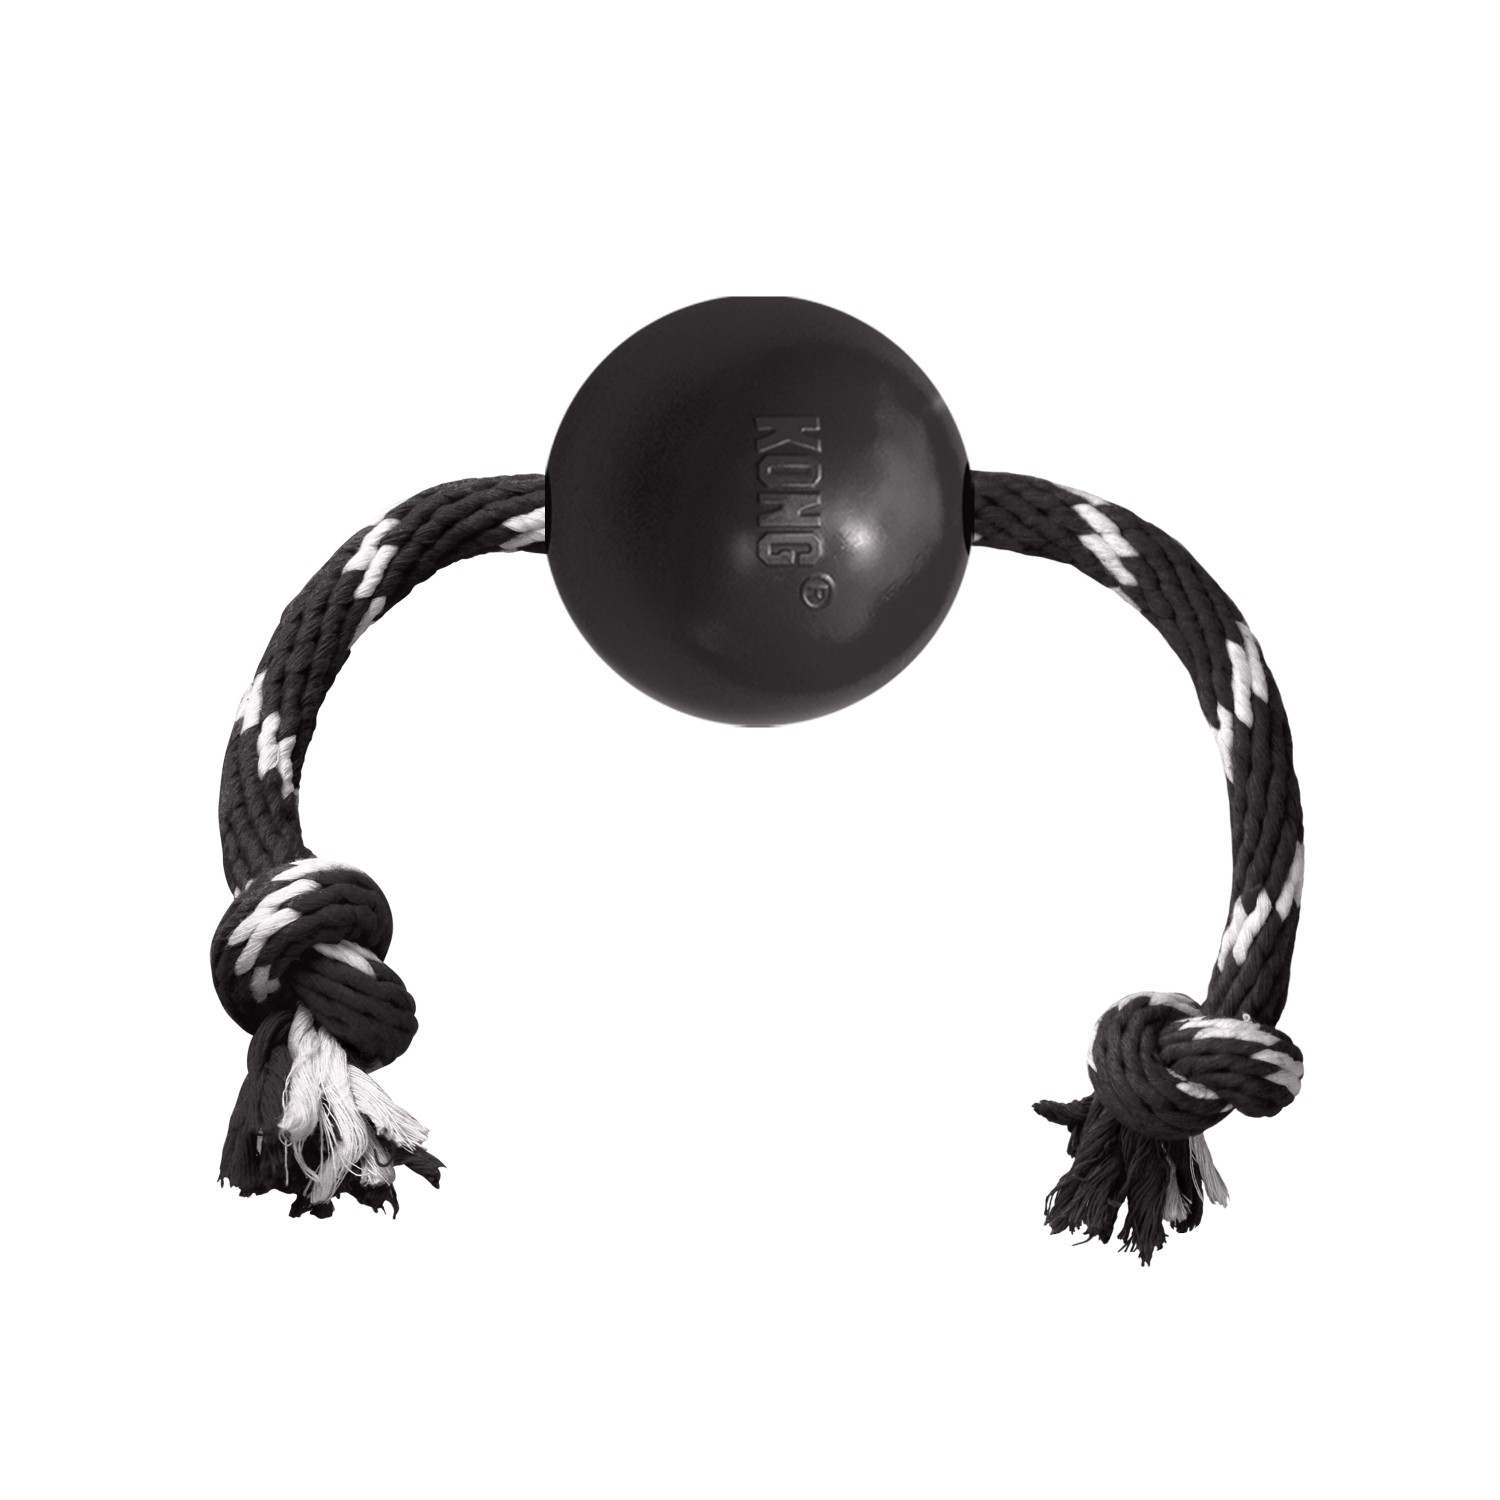 Extreme Ball W/Rope L KONG